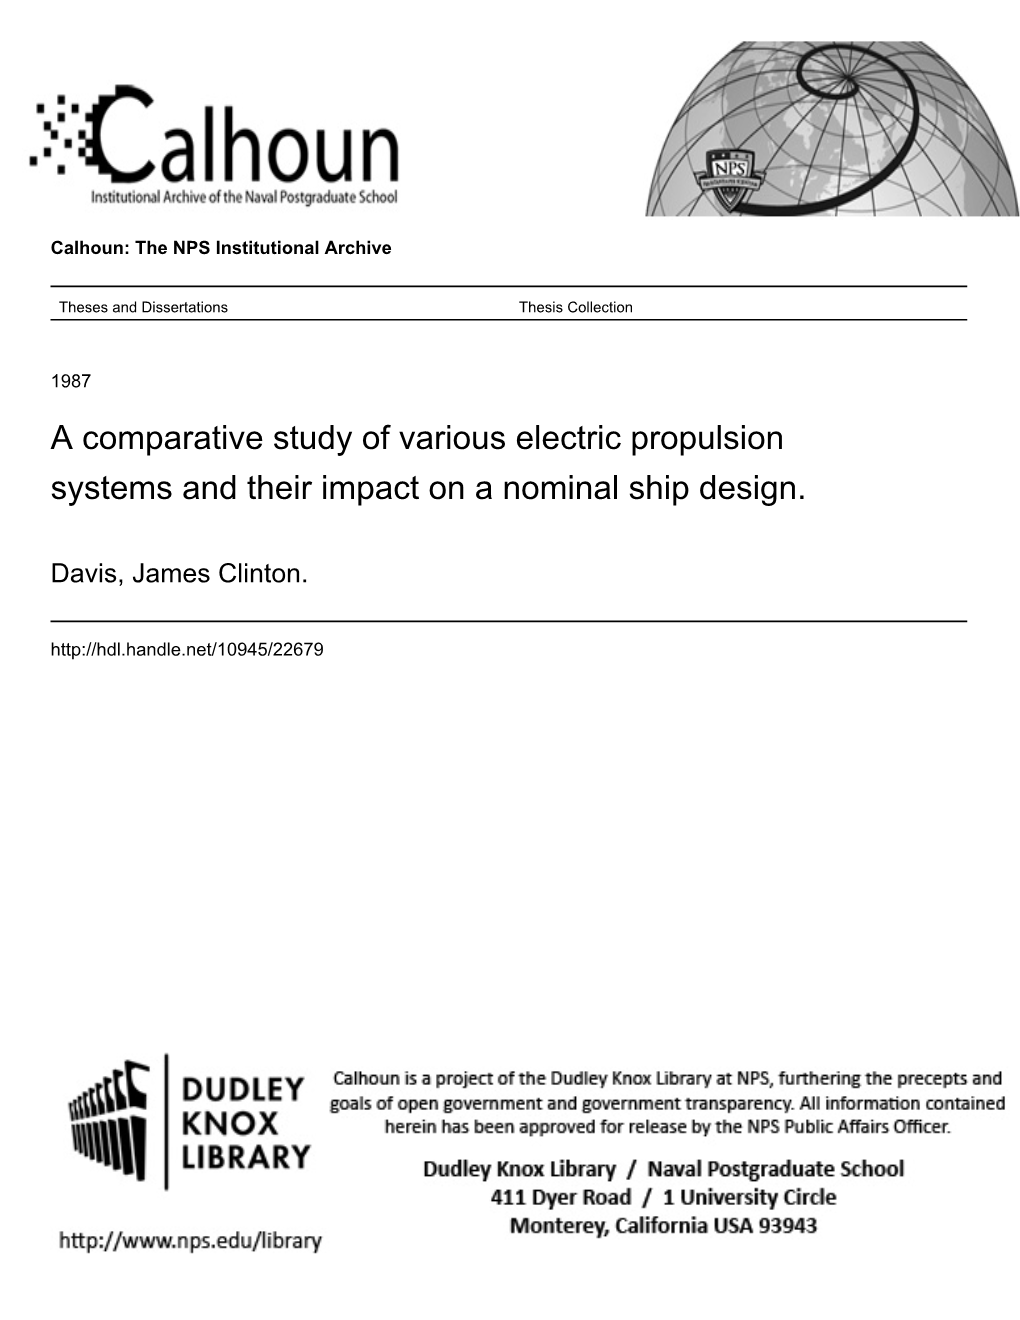 A Comparative Study of Various Electric Propulsion Systems and Their Impact on a Nominal Ship Design